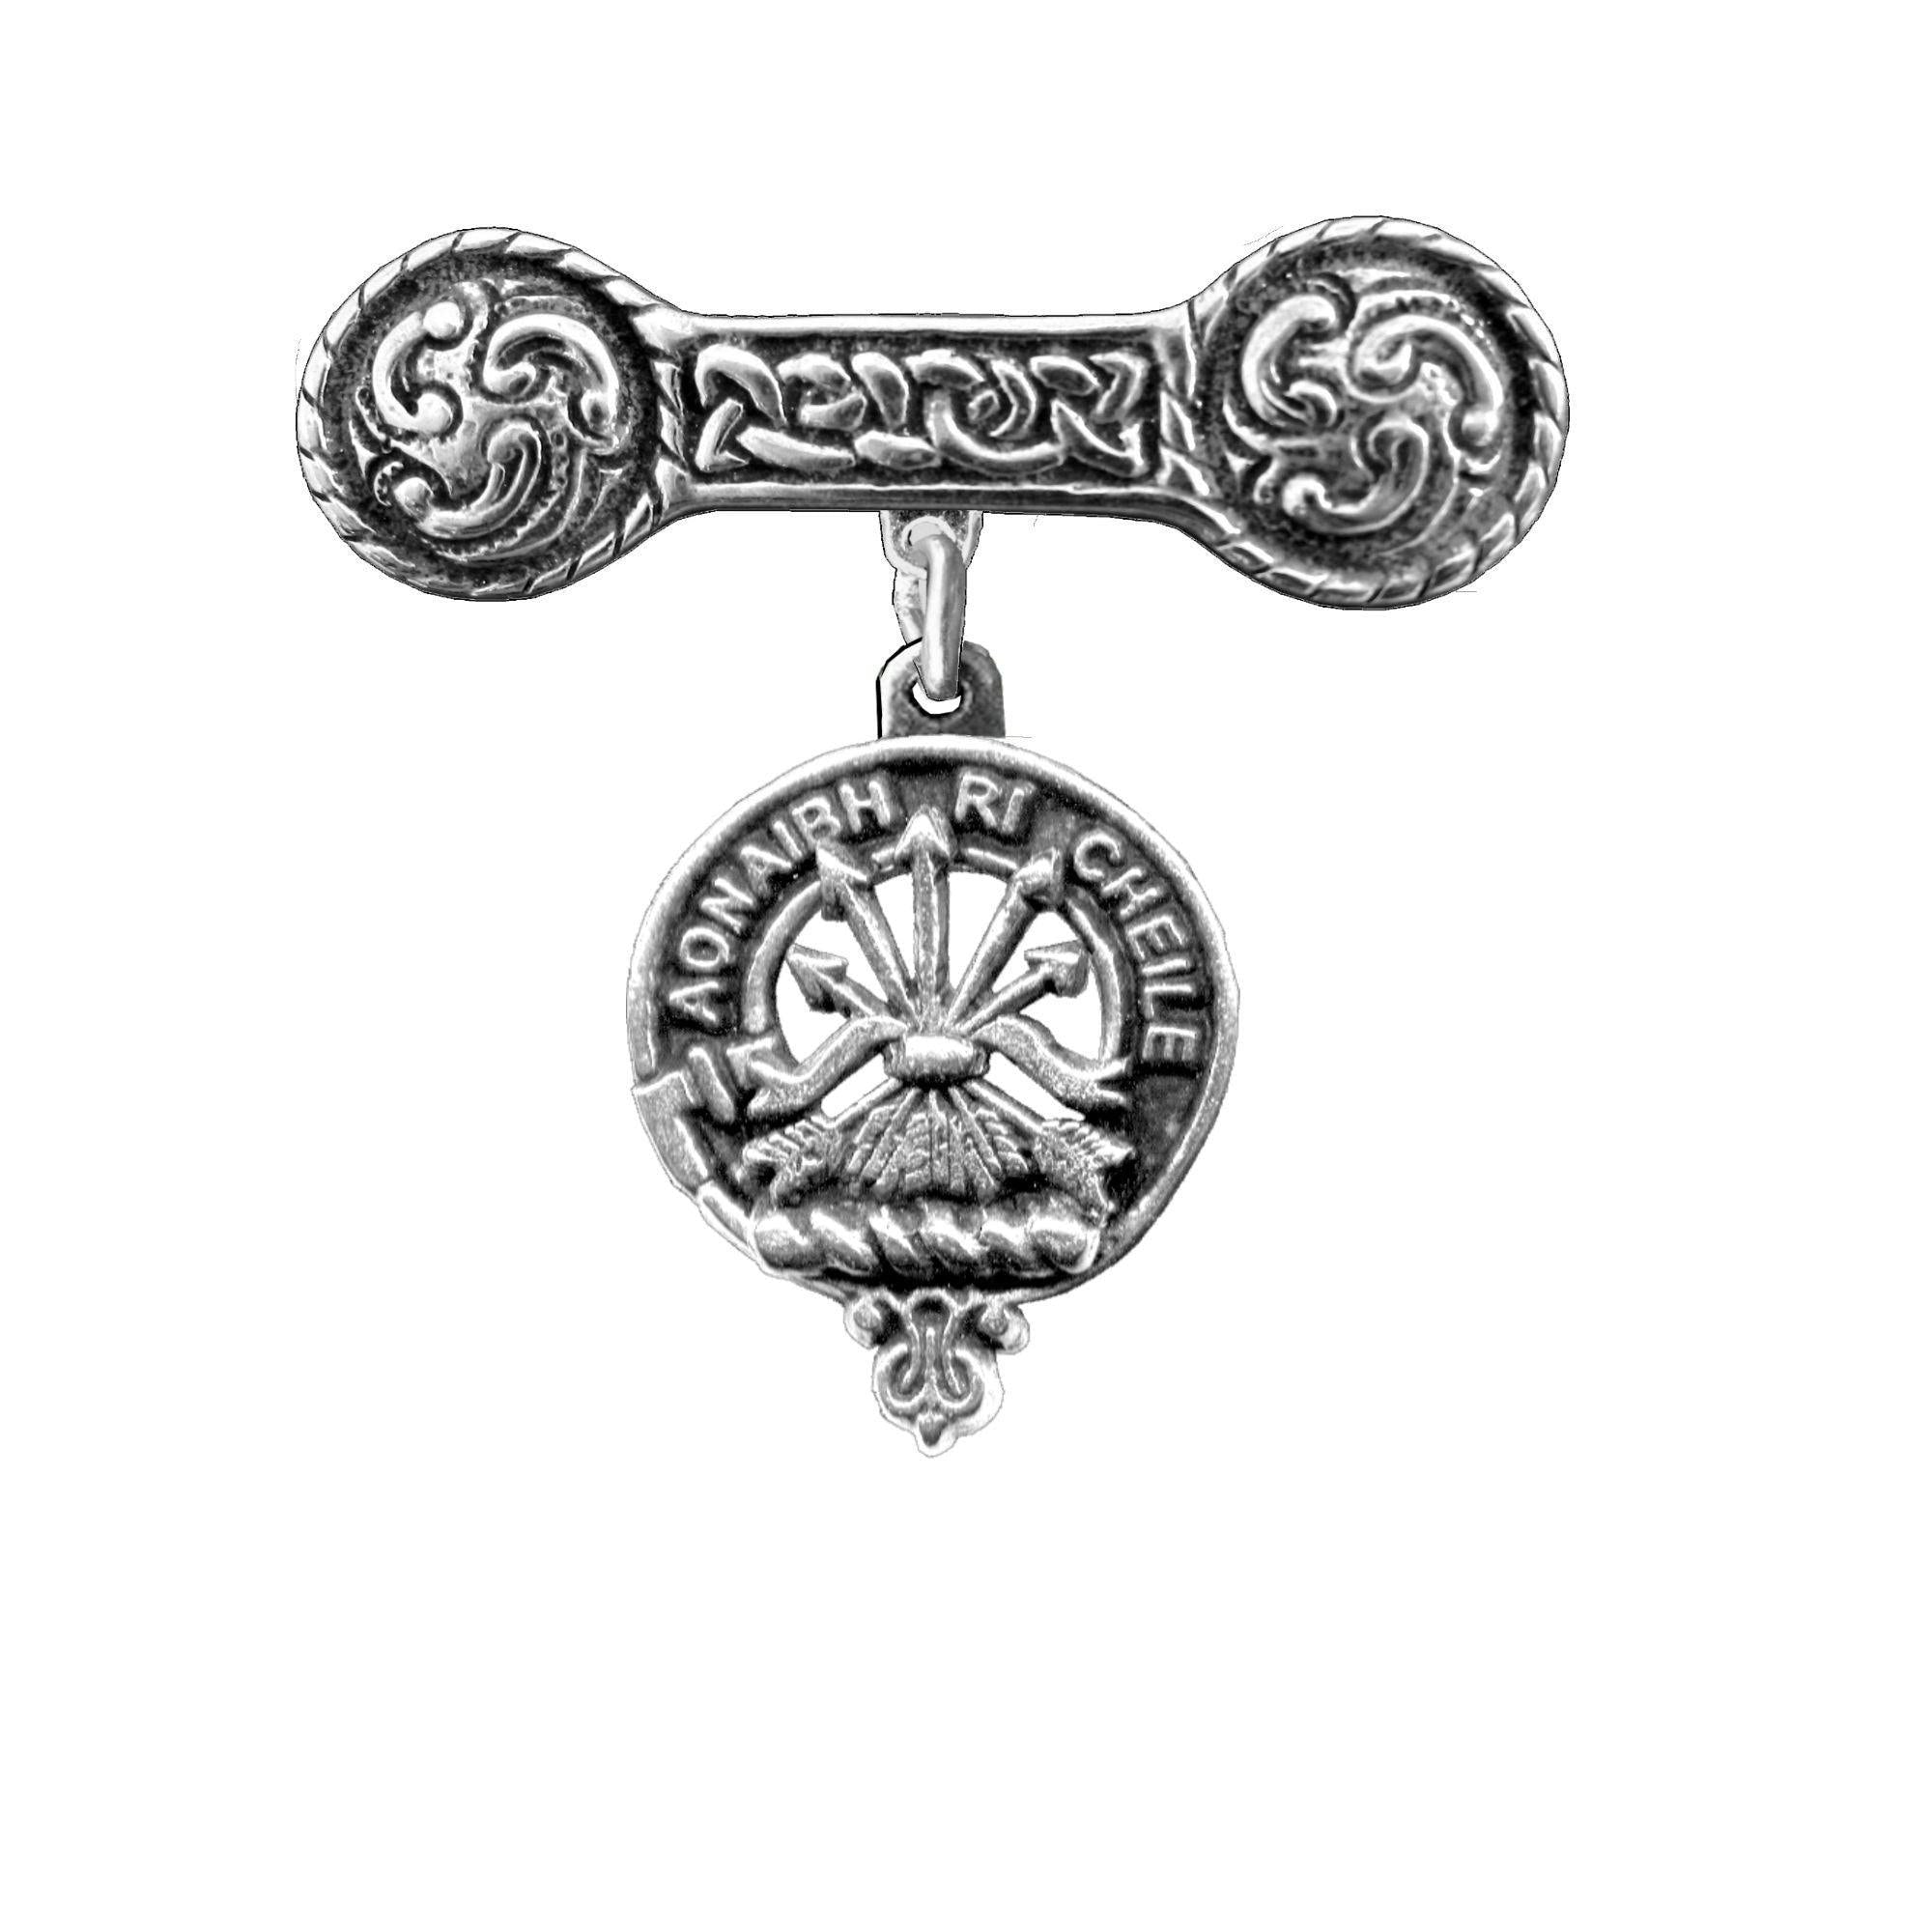 Cameron Clan Crest Iona Bar Brooch - Sterling Silver